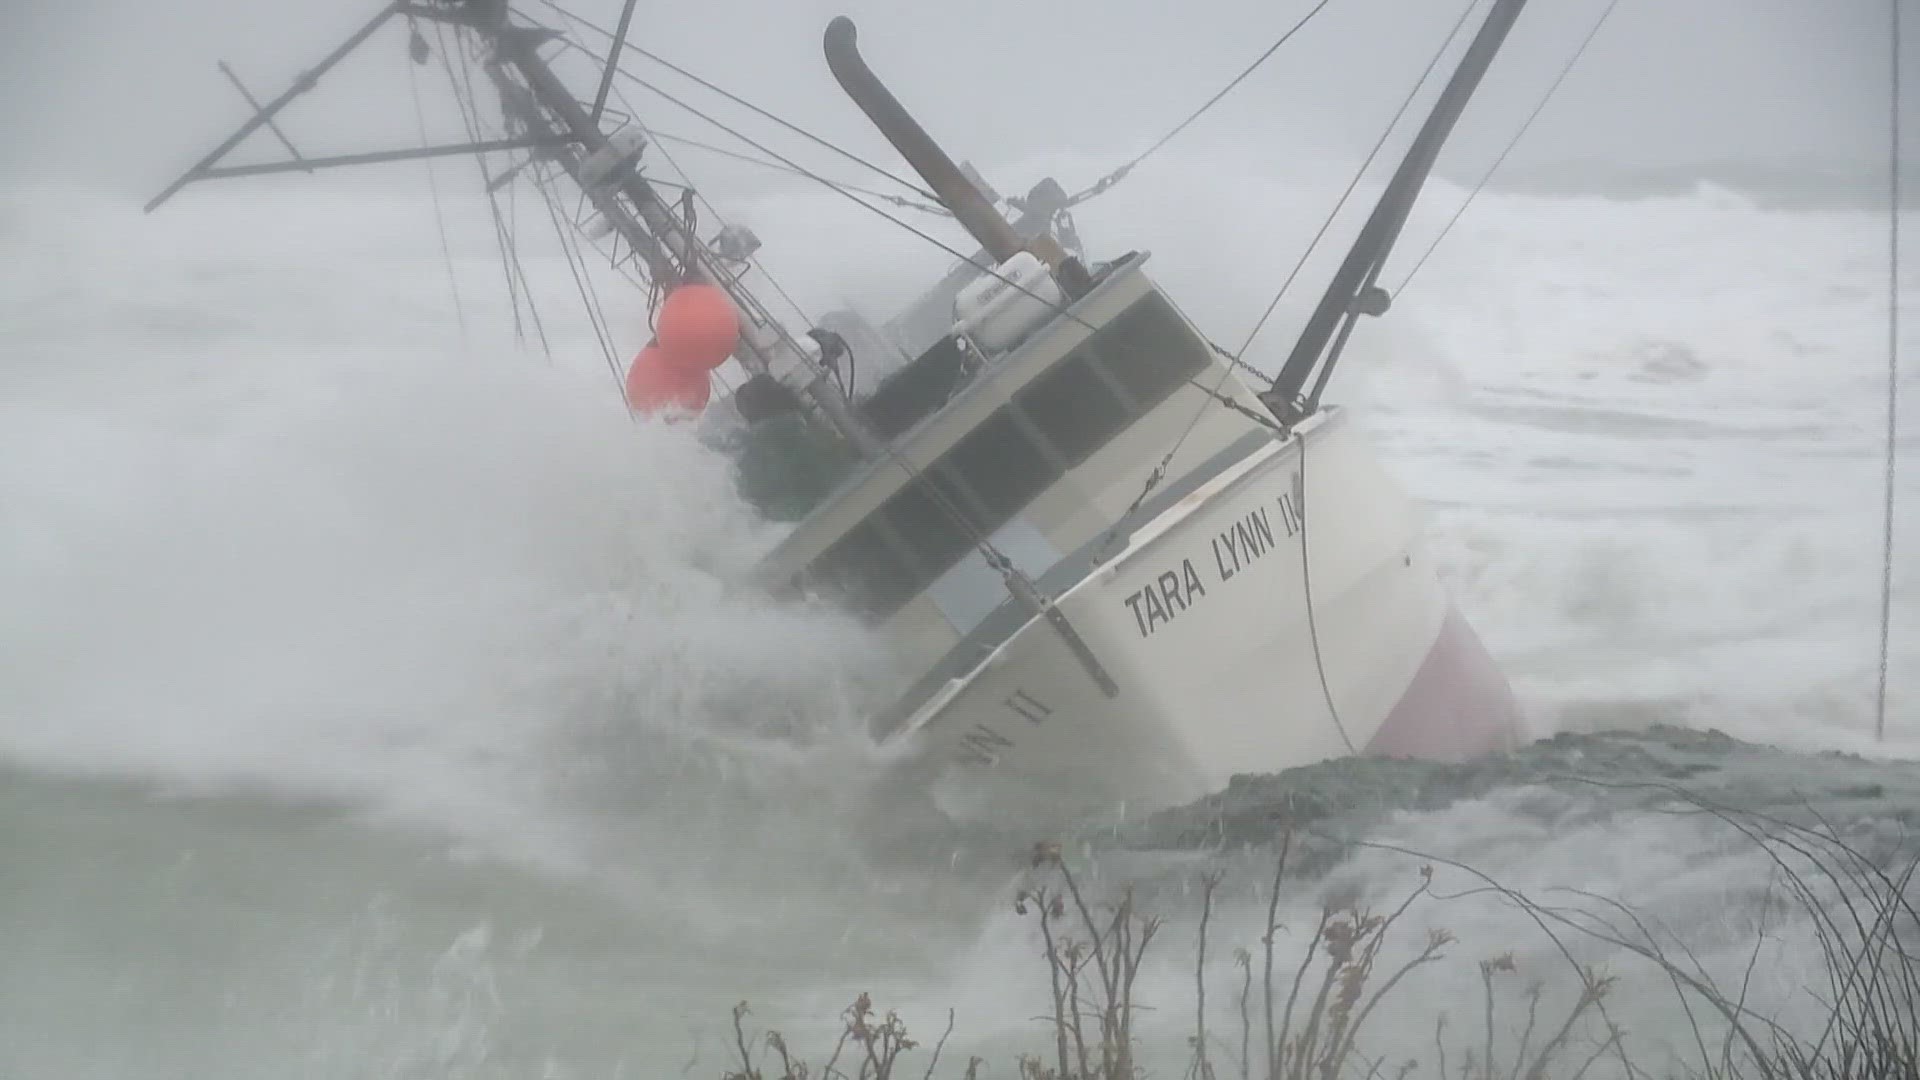 Fishing vessel that crashed in Cape Elizabeth will be demolished